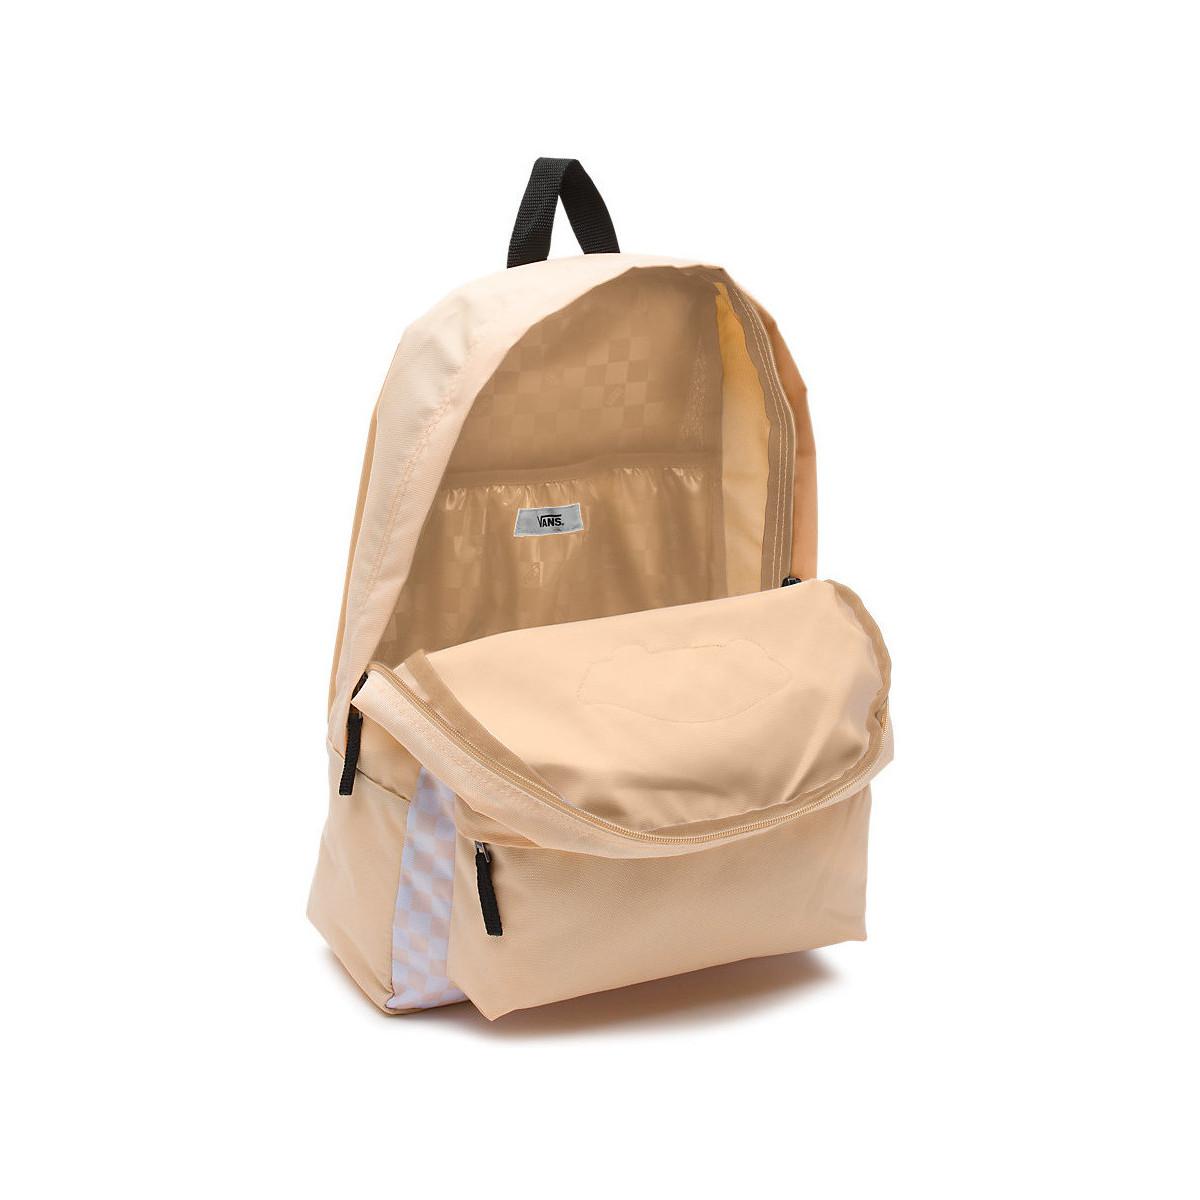 vans realm backpack bleached apricot